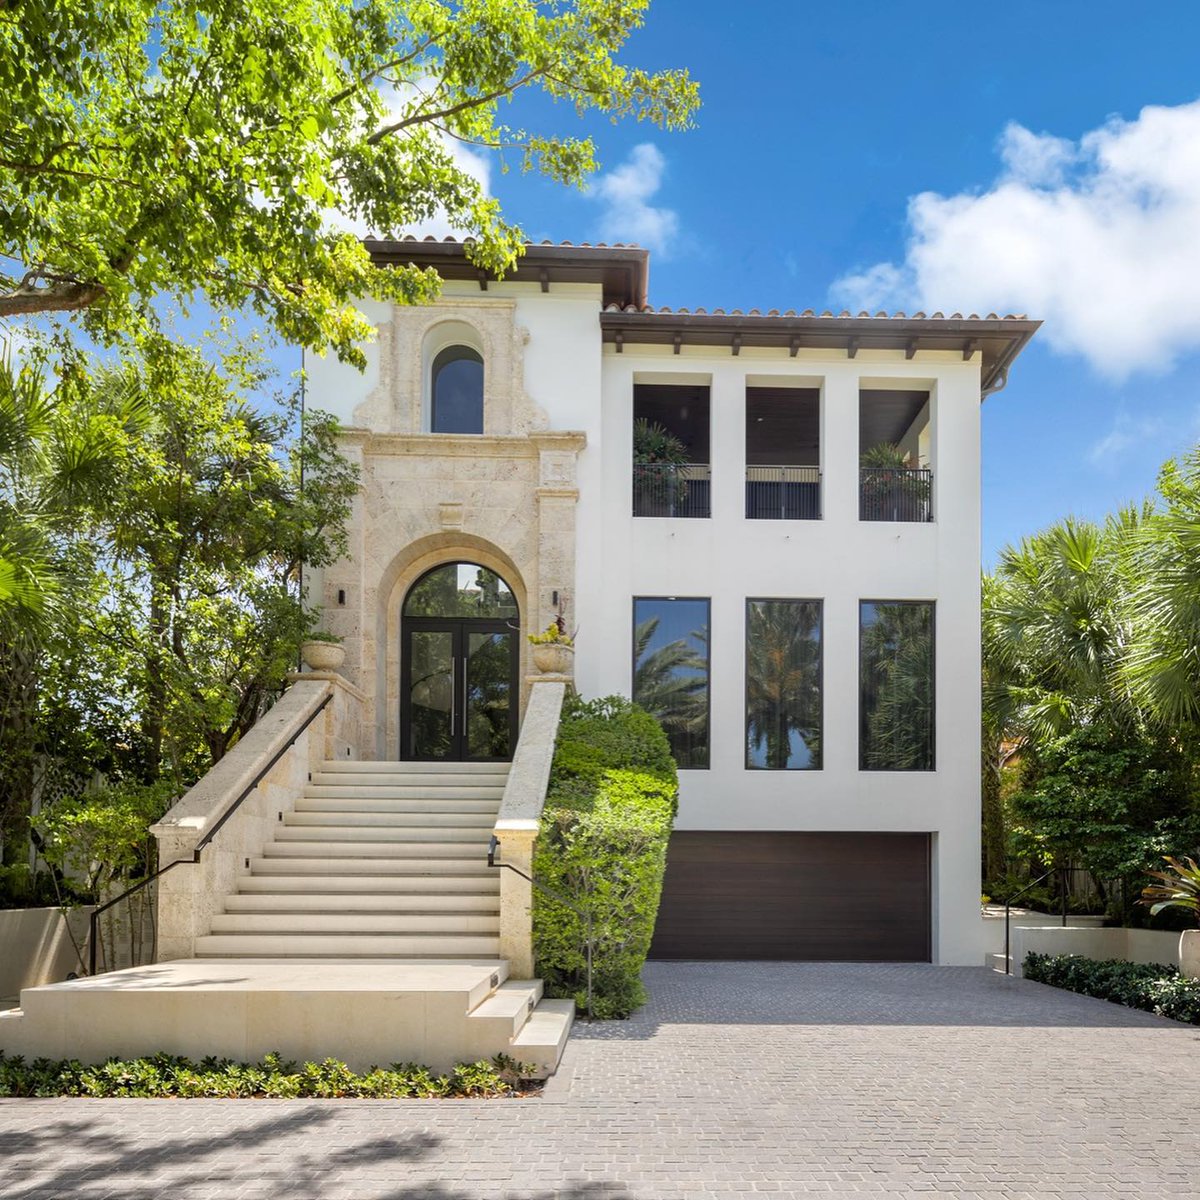 Listed by goldendina of douglaselliman, here's what $20,000,000 gets you in Miami's Golden Bea...